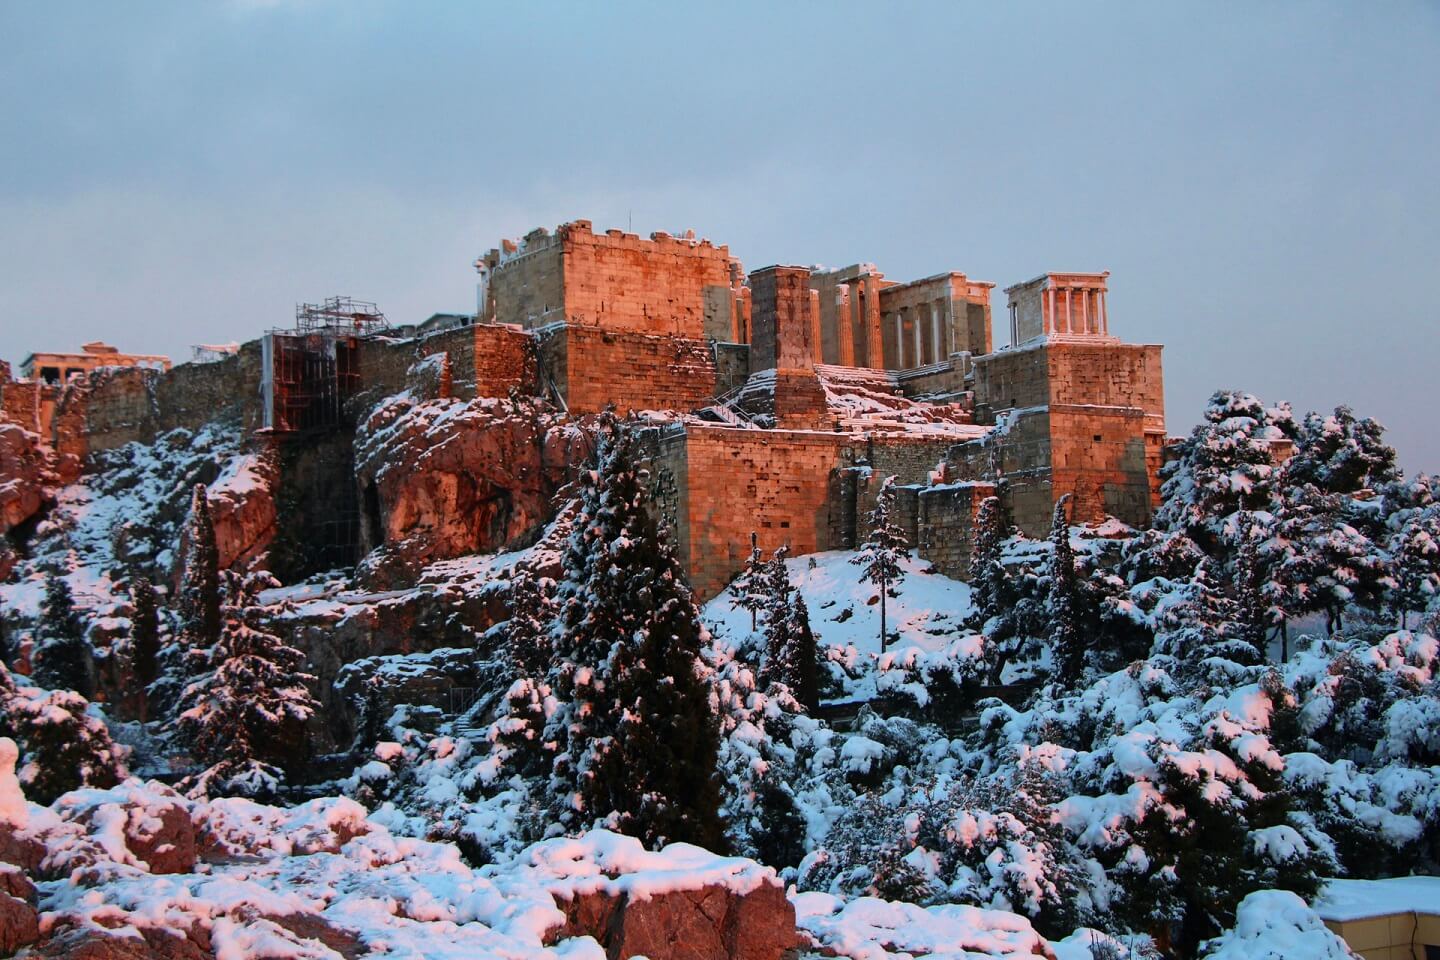 Does it Snow in Greece? Here are 7 Places to Find Snow in Greece